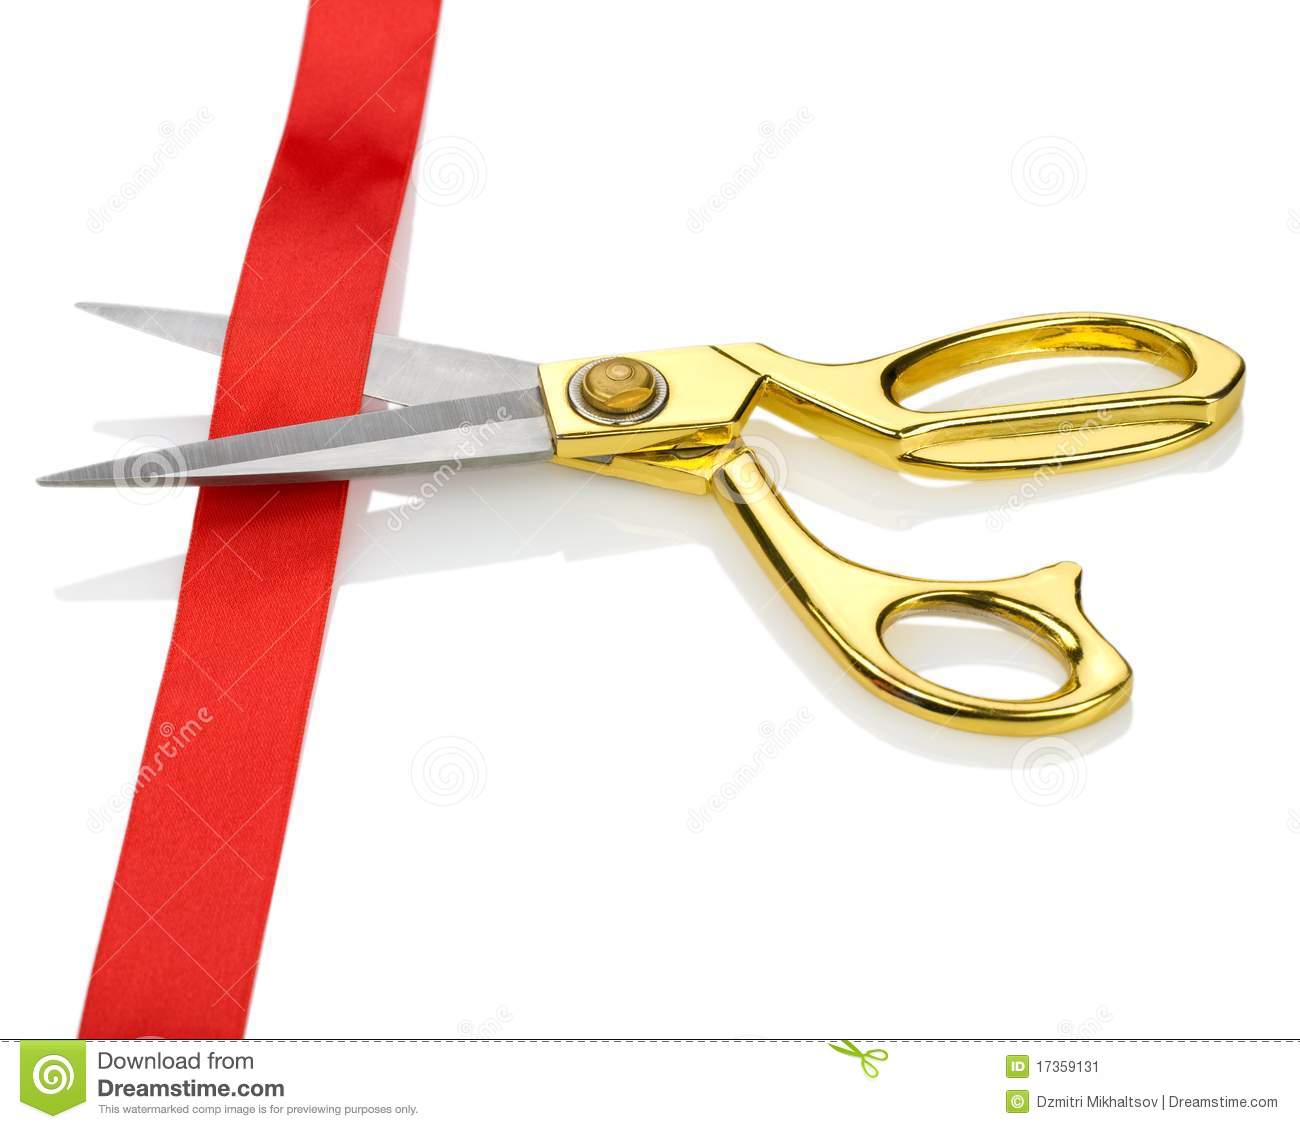 Scissors With A Red Tape Stock Image   Image  17359131